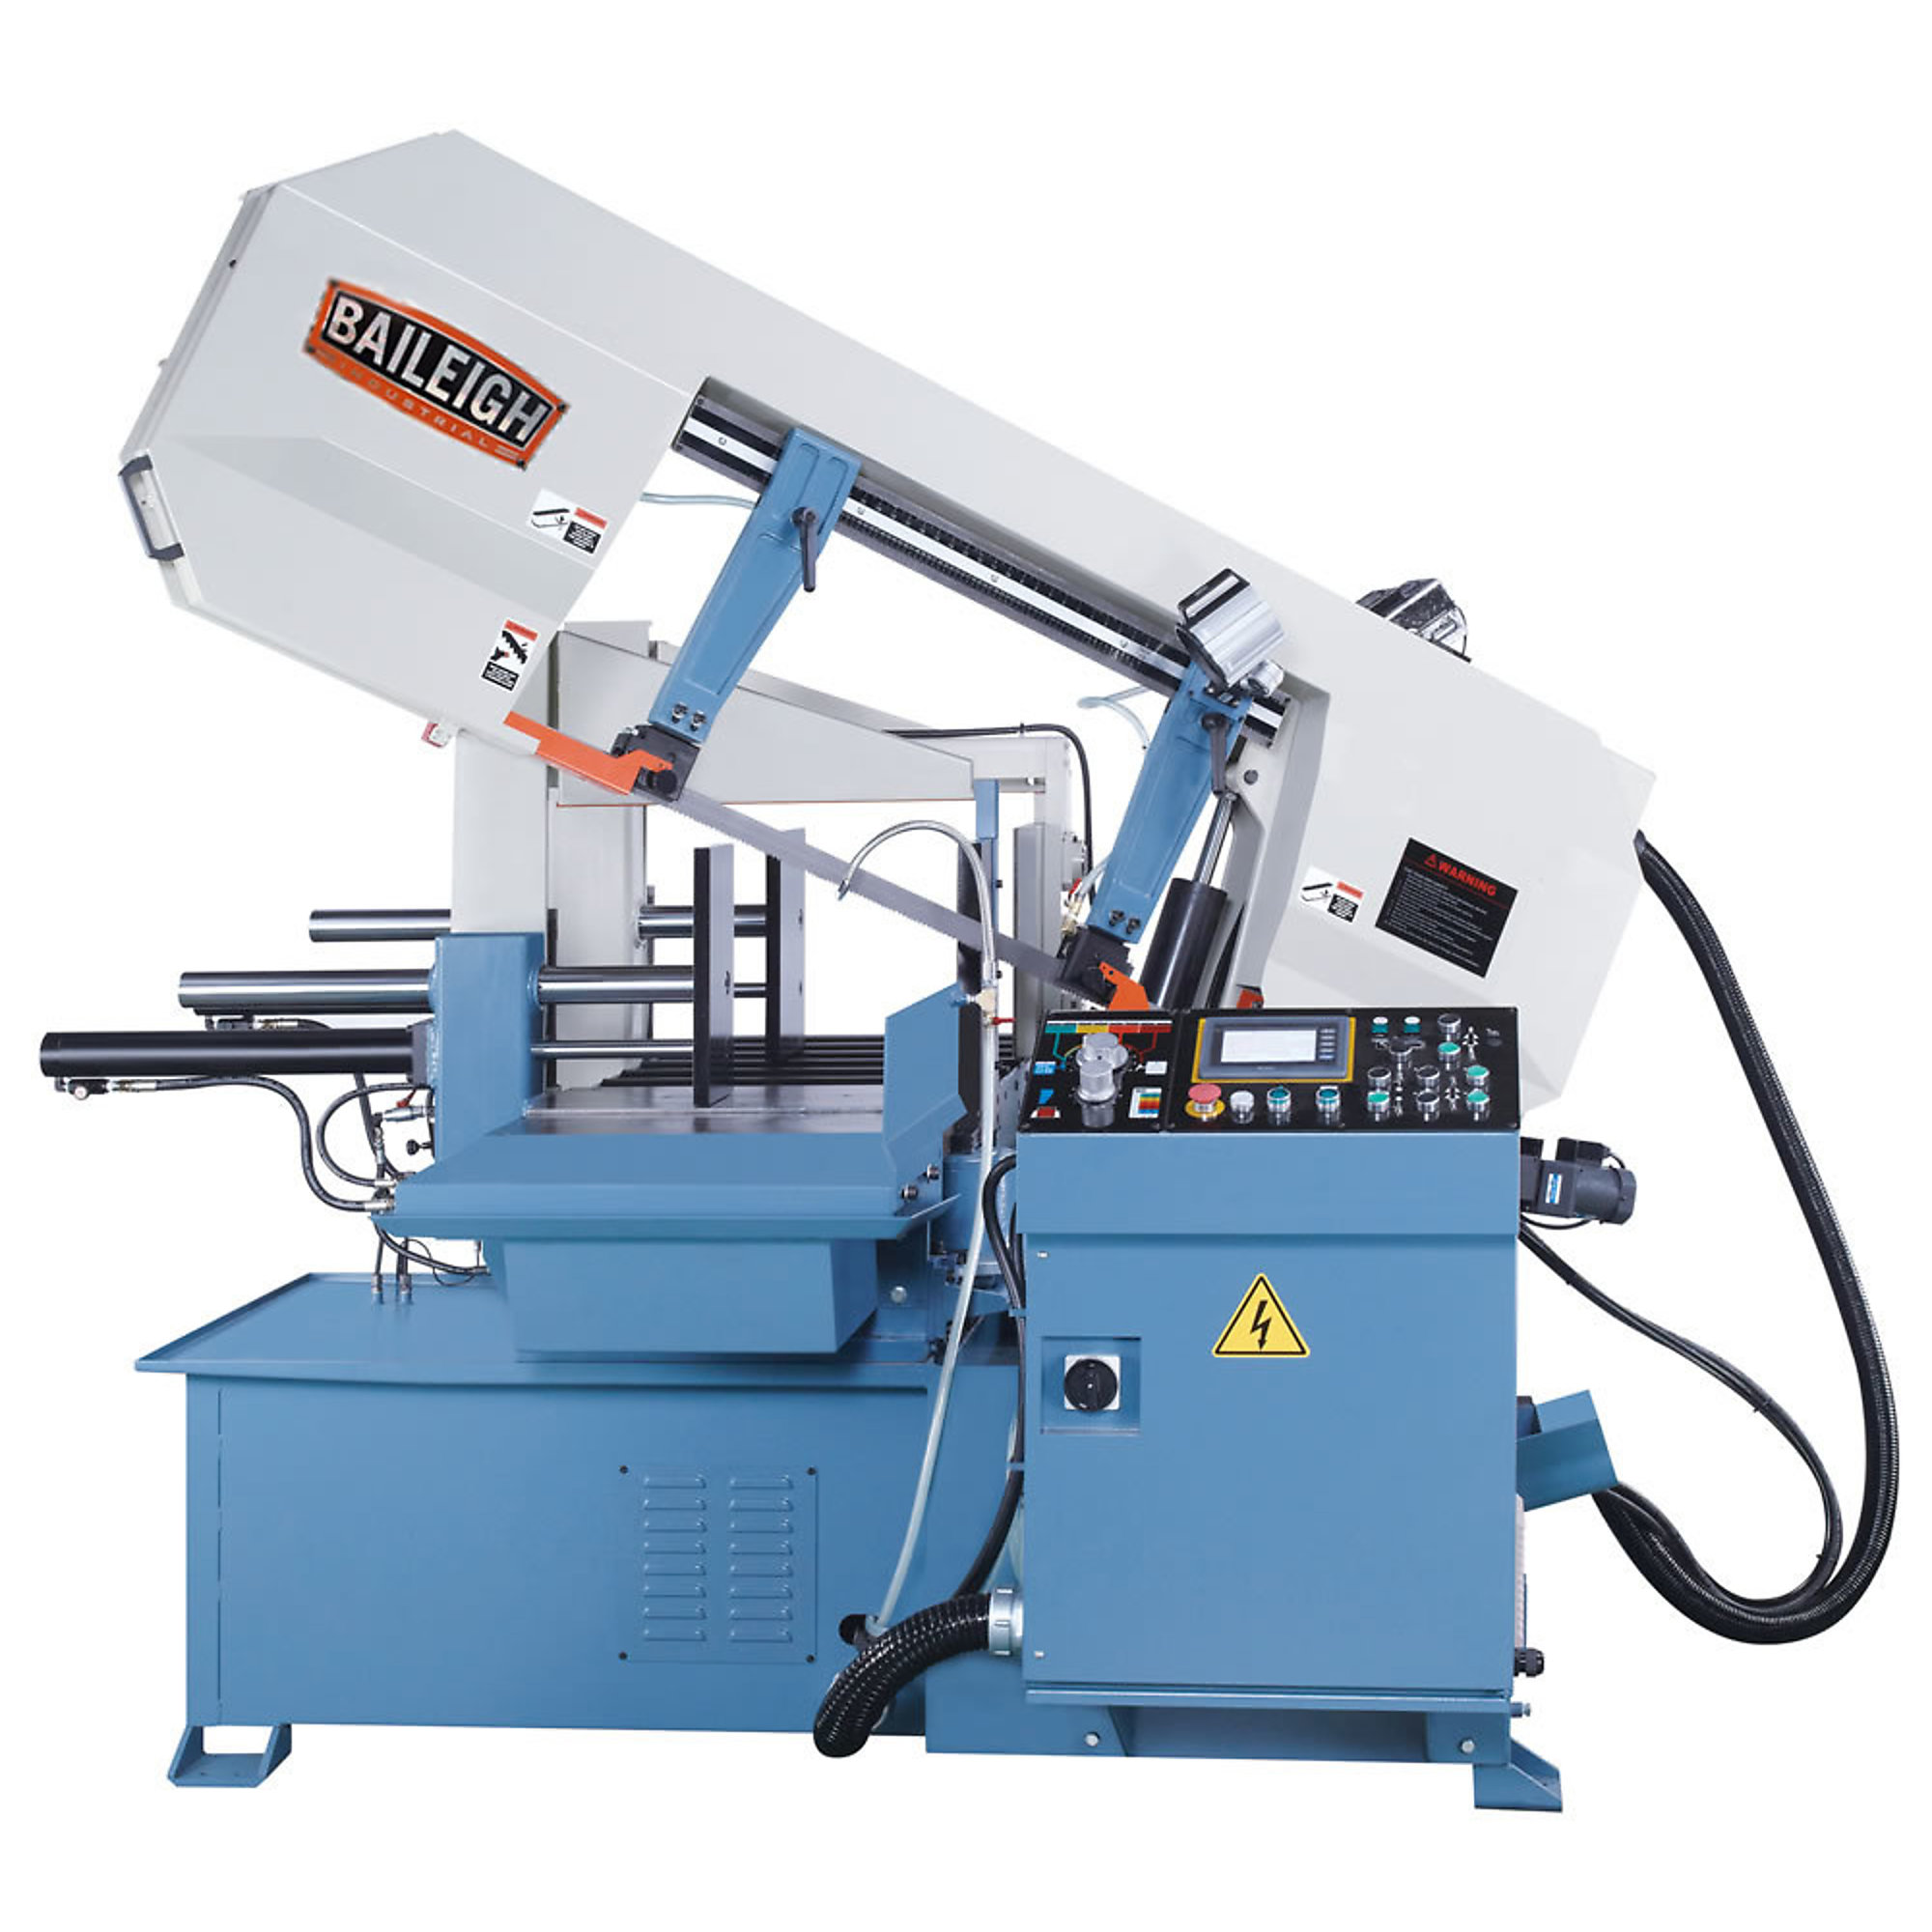 Baileigh Automatic Metal Cutting Band Saw, 5 HP, Volts 220, Model BS-24A